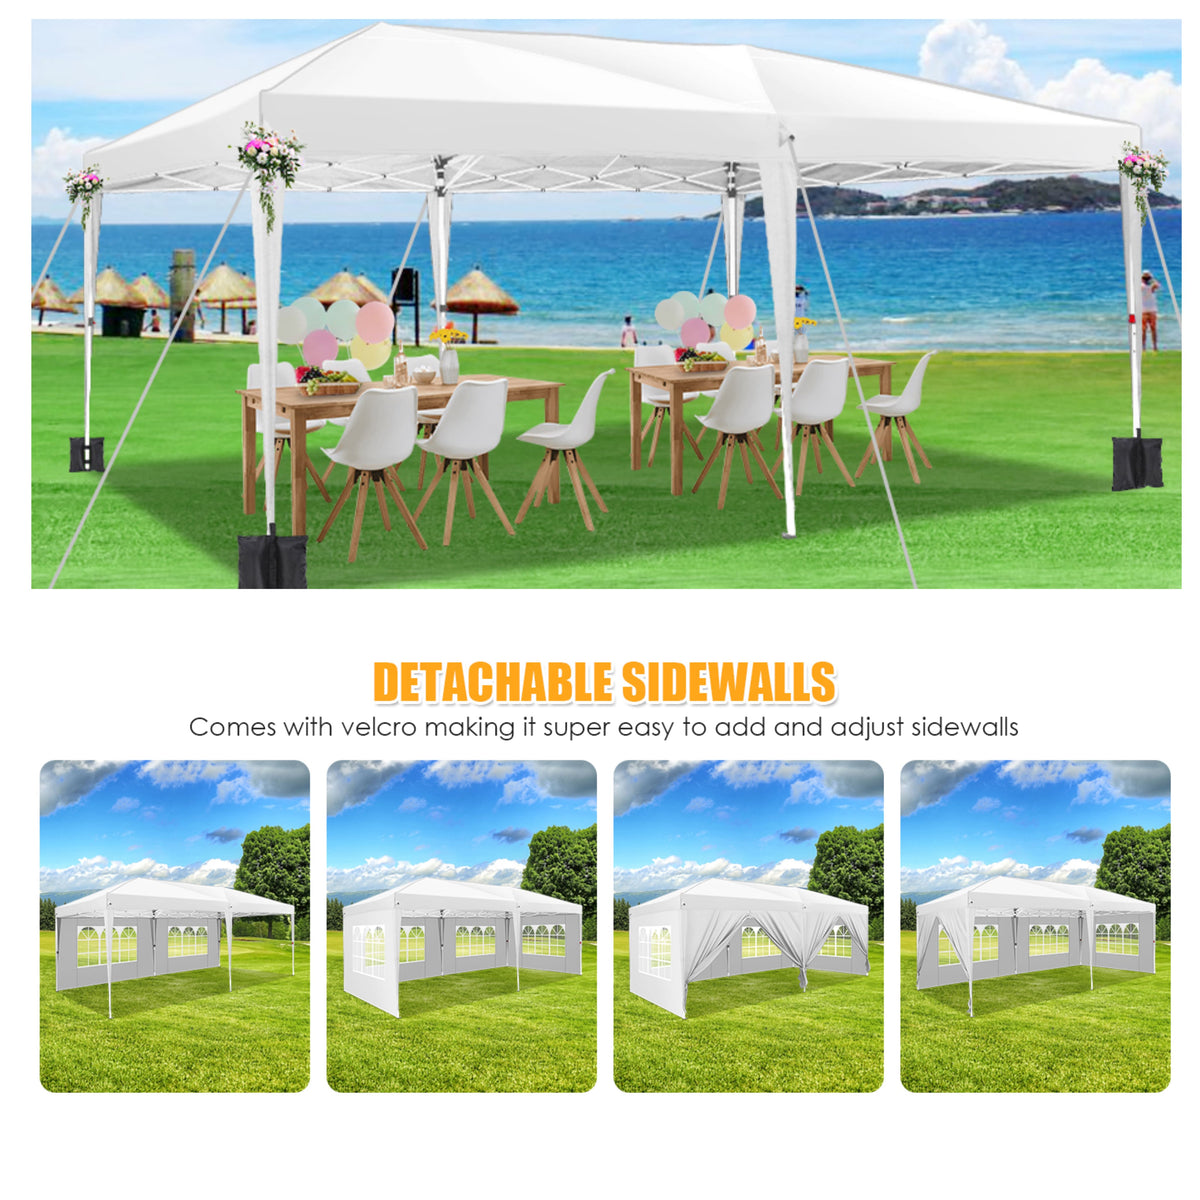 YUEBO 10x20 Pop Up Canopy Tents for Parties, Waterproof Canopy Tent with Sidewalls,Outdoor Gazebo Canopy with Carry Bag, Tent for Backyard, Wedding, Patio, Event,Commercial, White